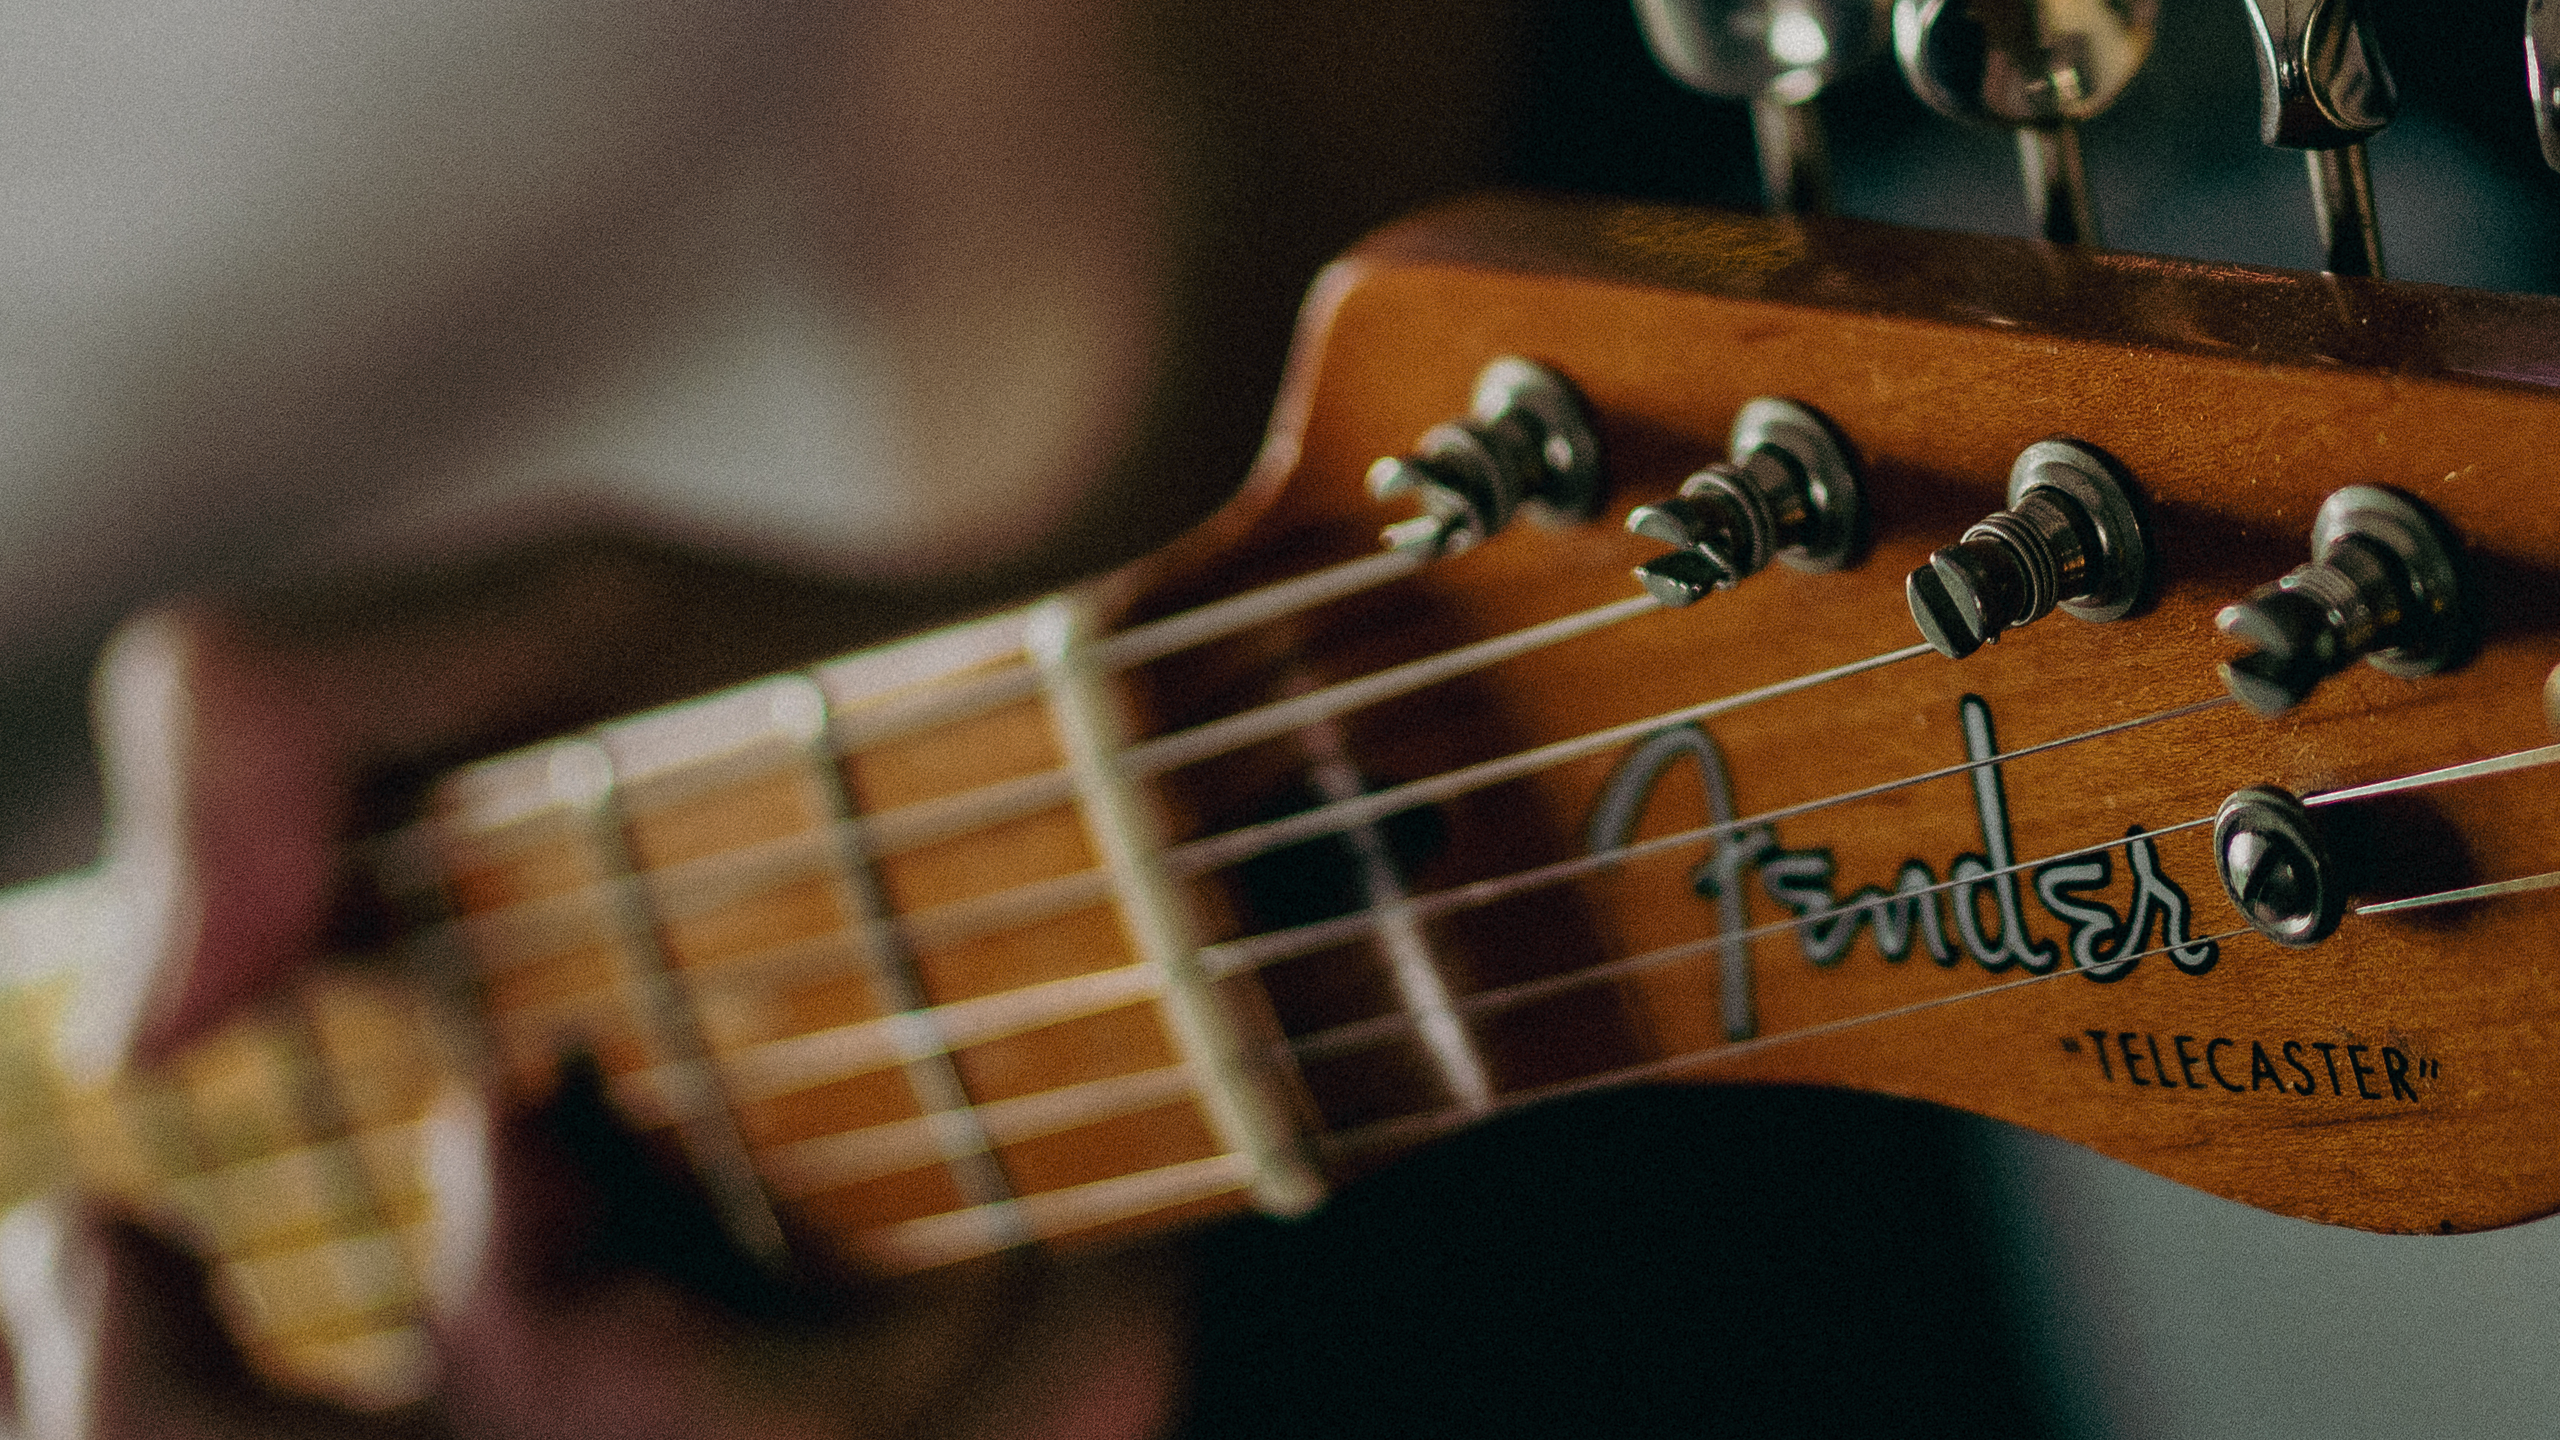 Close up of a Telecaster guitar fingerboard with fairy lights in the background